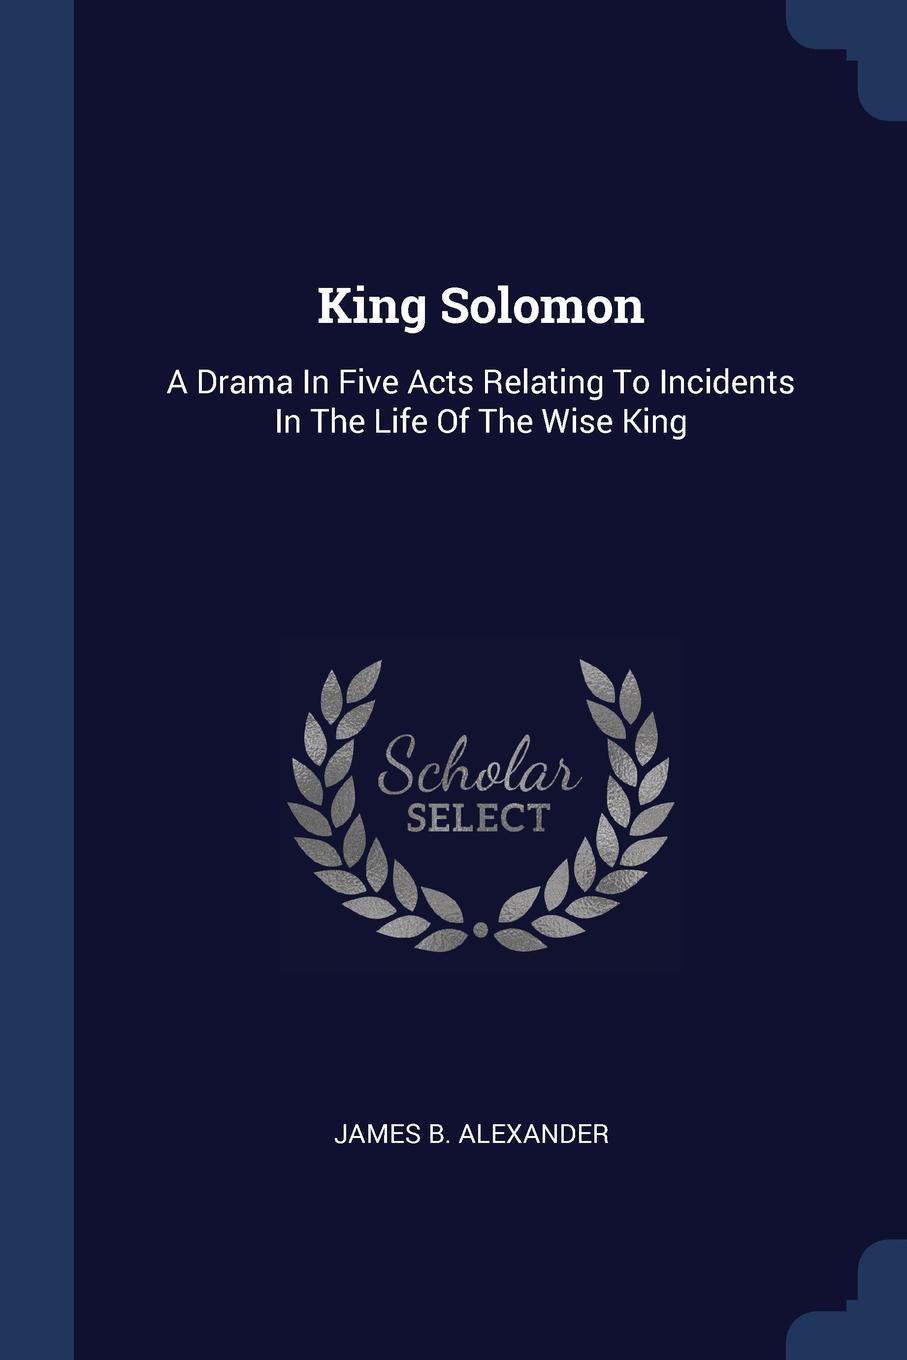 King Solomon. A Drama In Five Acts Relating To Incidents In The Life Of The Wise King